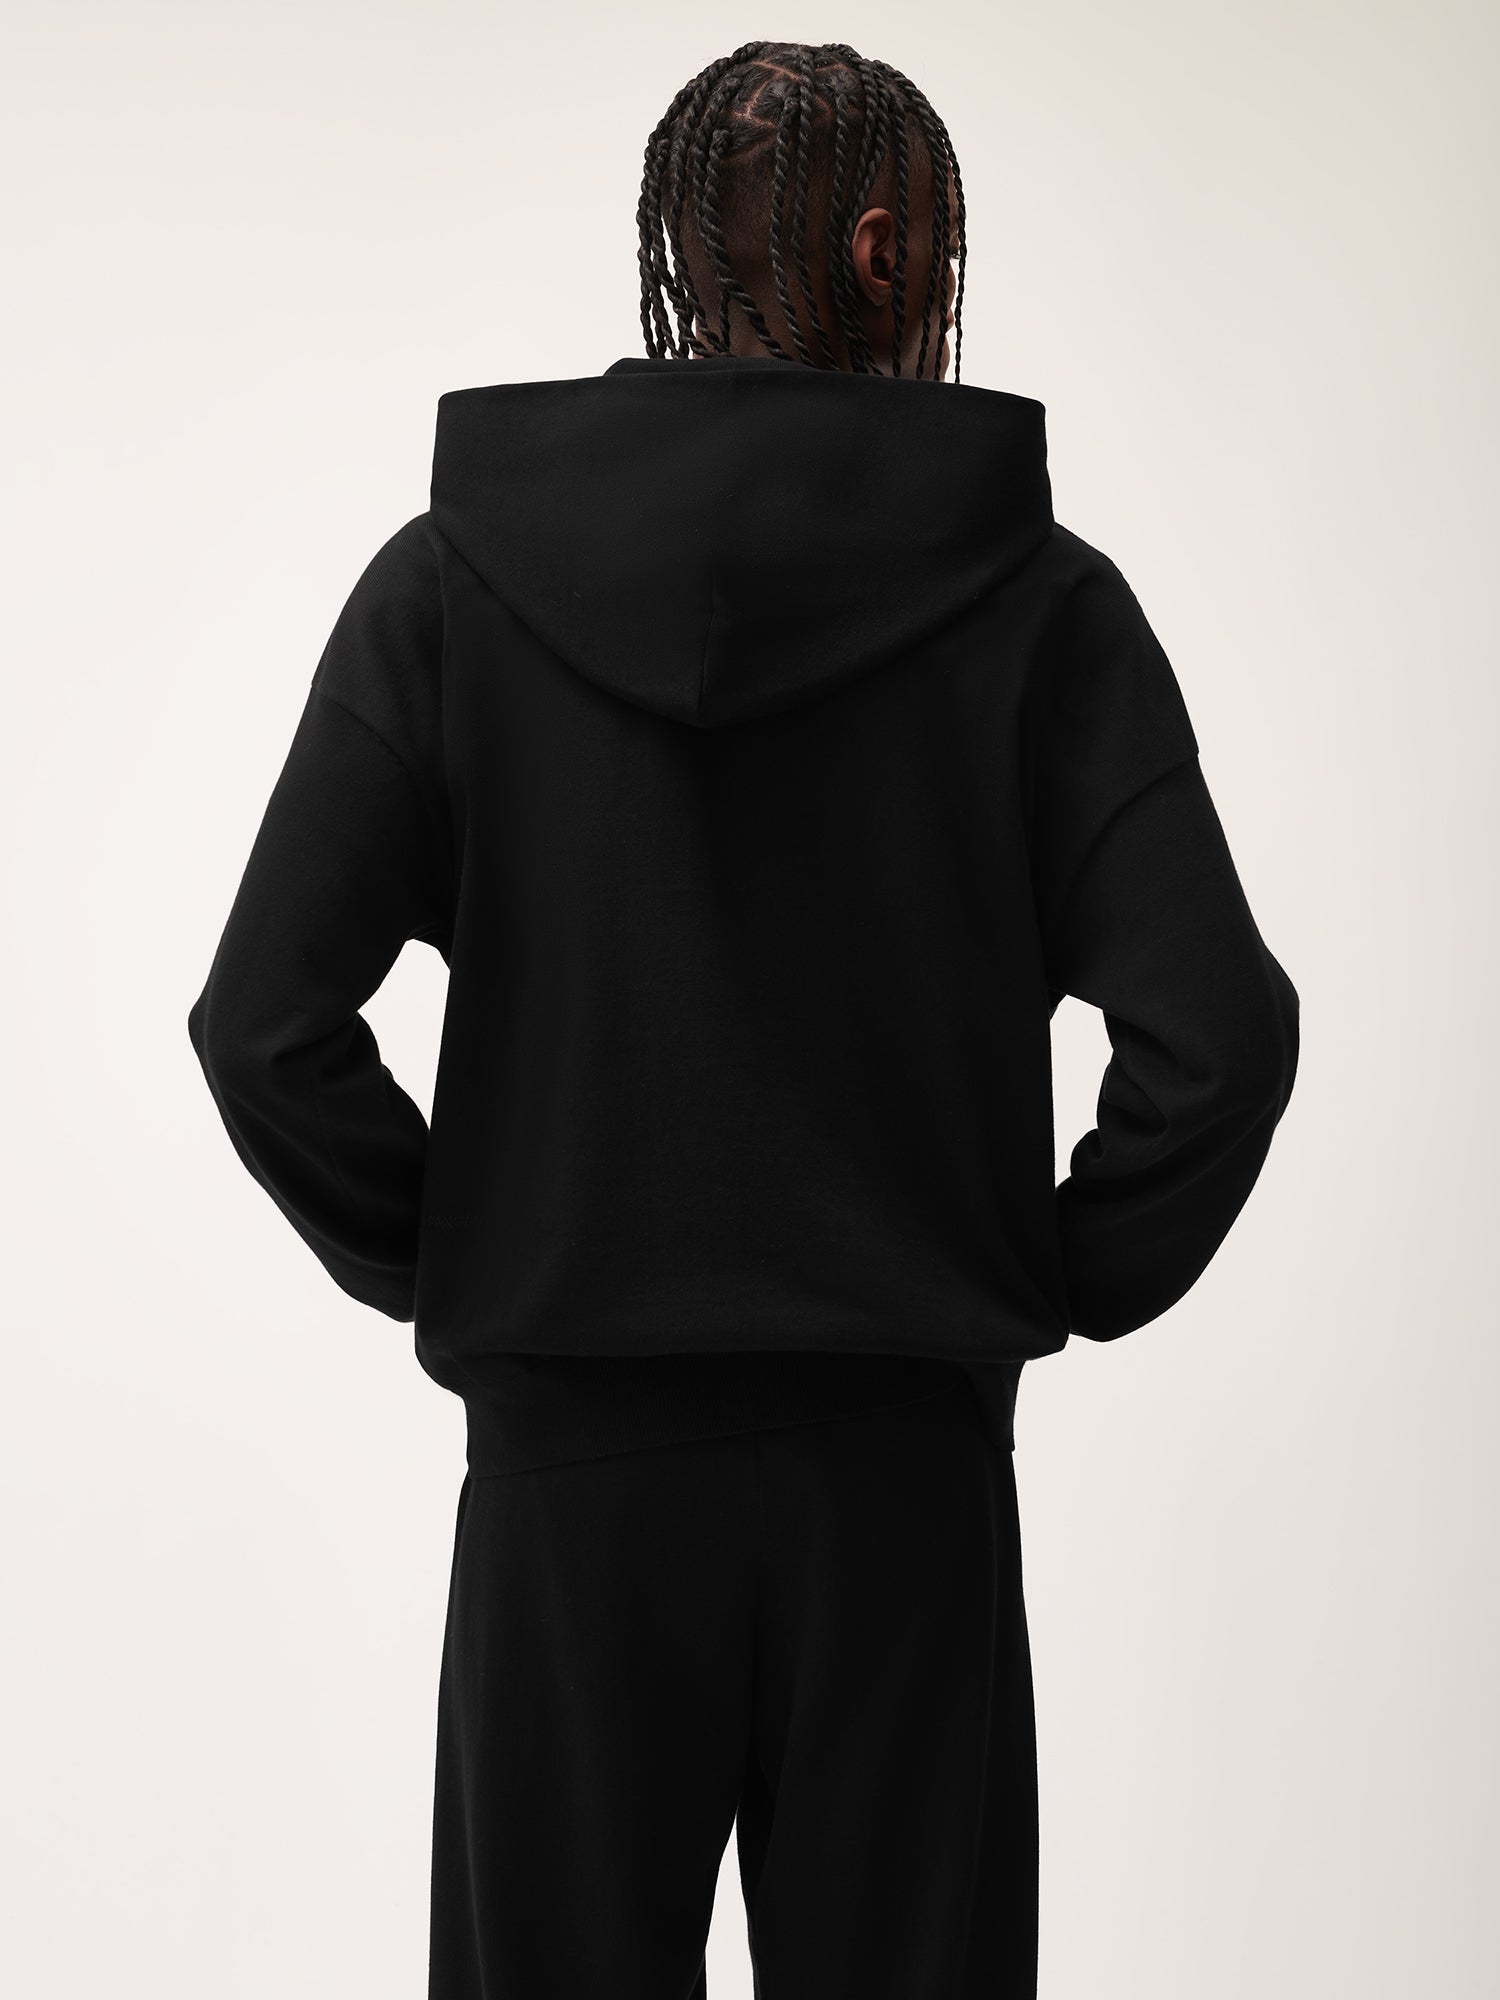 DNA_Knitted_Hoodie_Black_Male-2